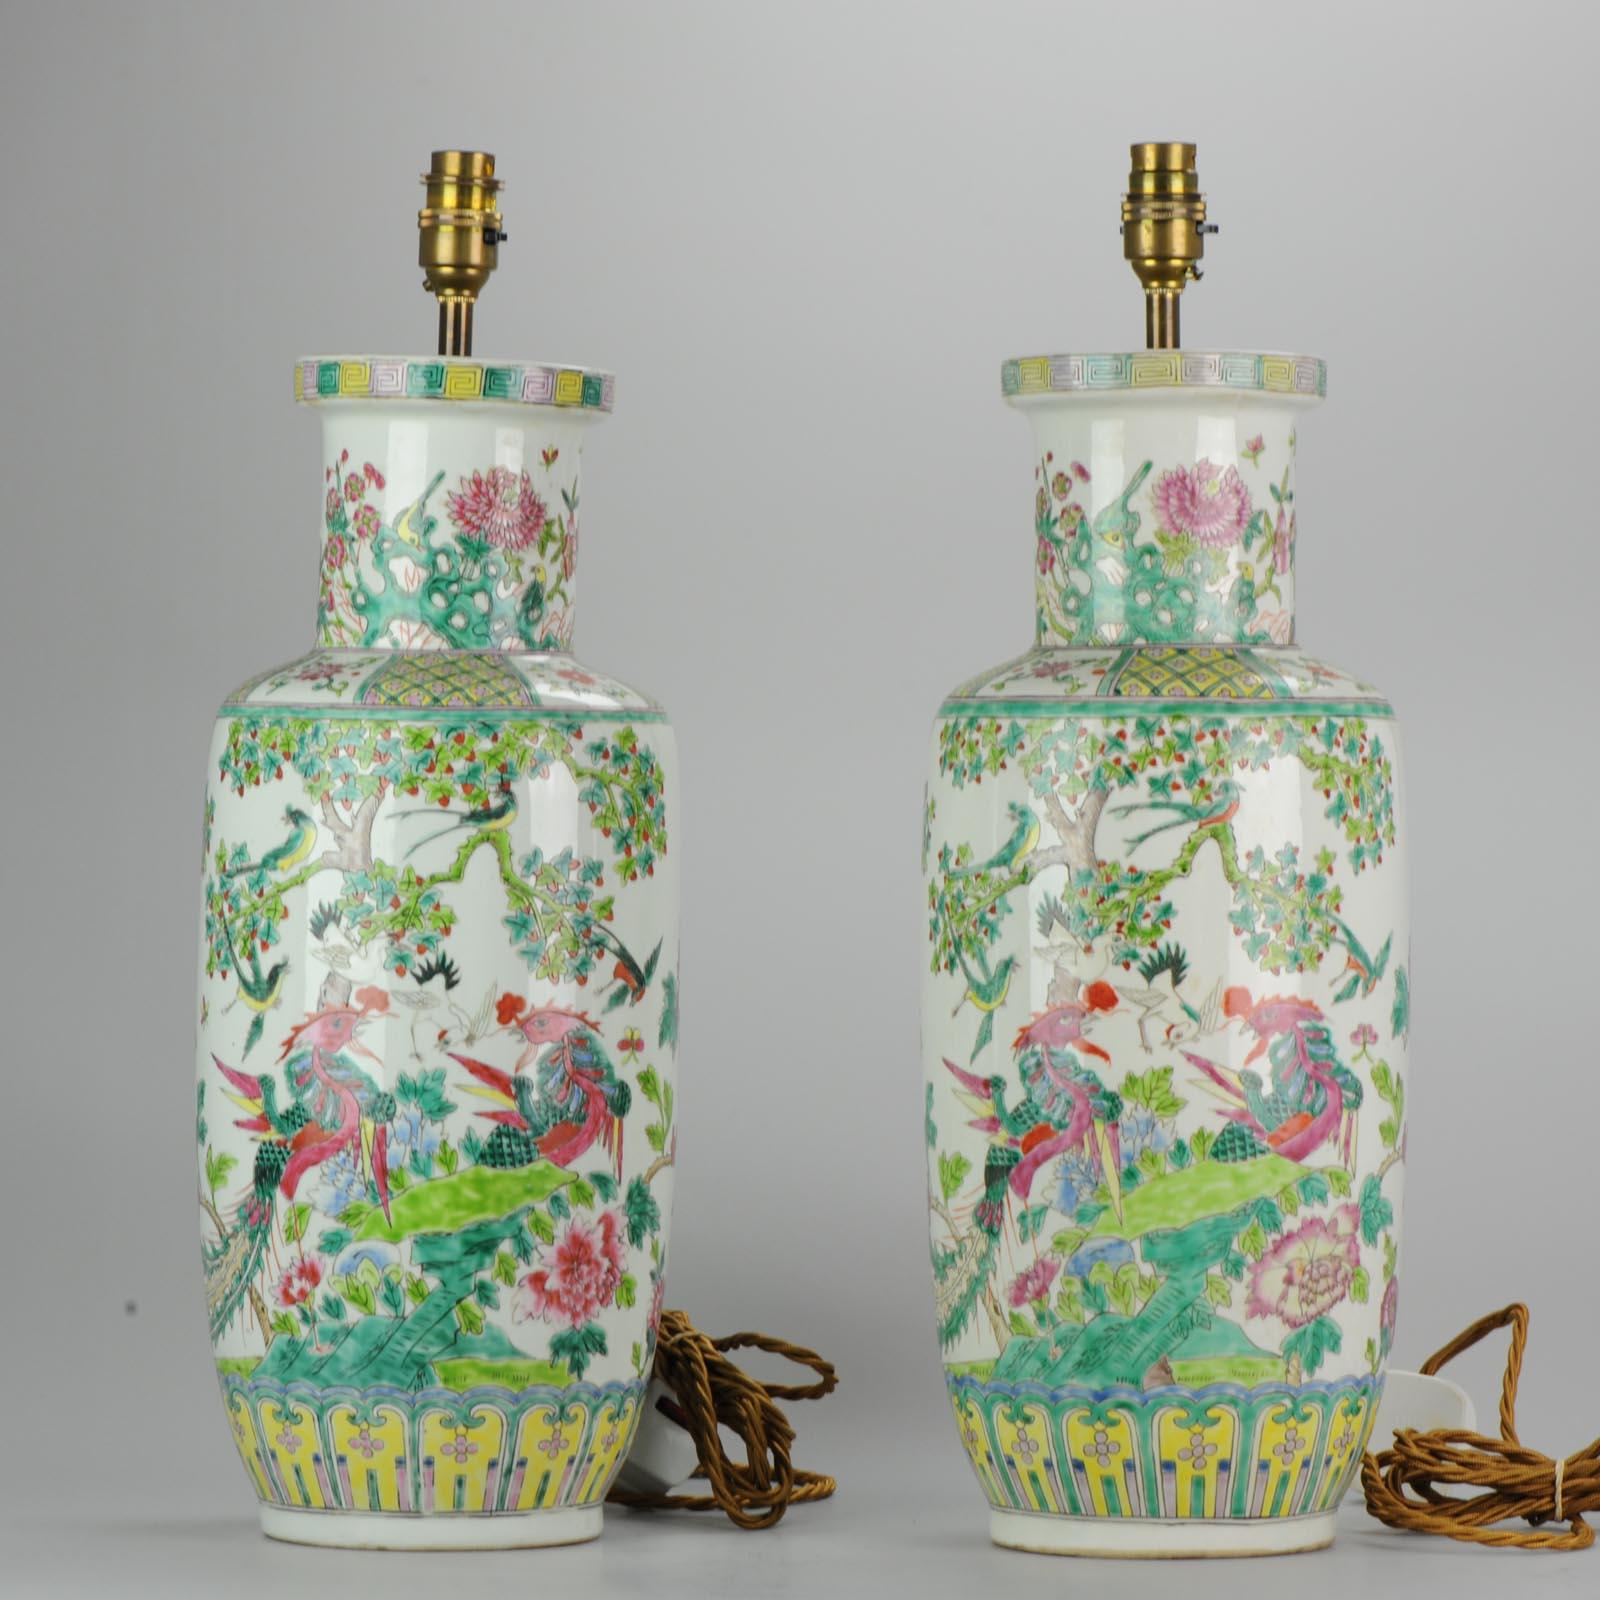 A very nicely decorated pair of vases with a fenghuang scene, second half of the 20th century
Condition:
Overall condition; some craquele. Size: Approximate 525 mm high total or 20.7 inch
Period:
21st century
20th century PRoC (1949-now).